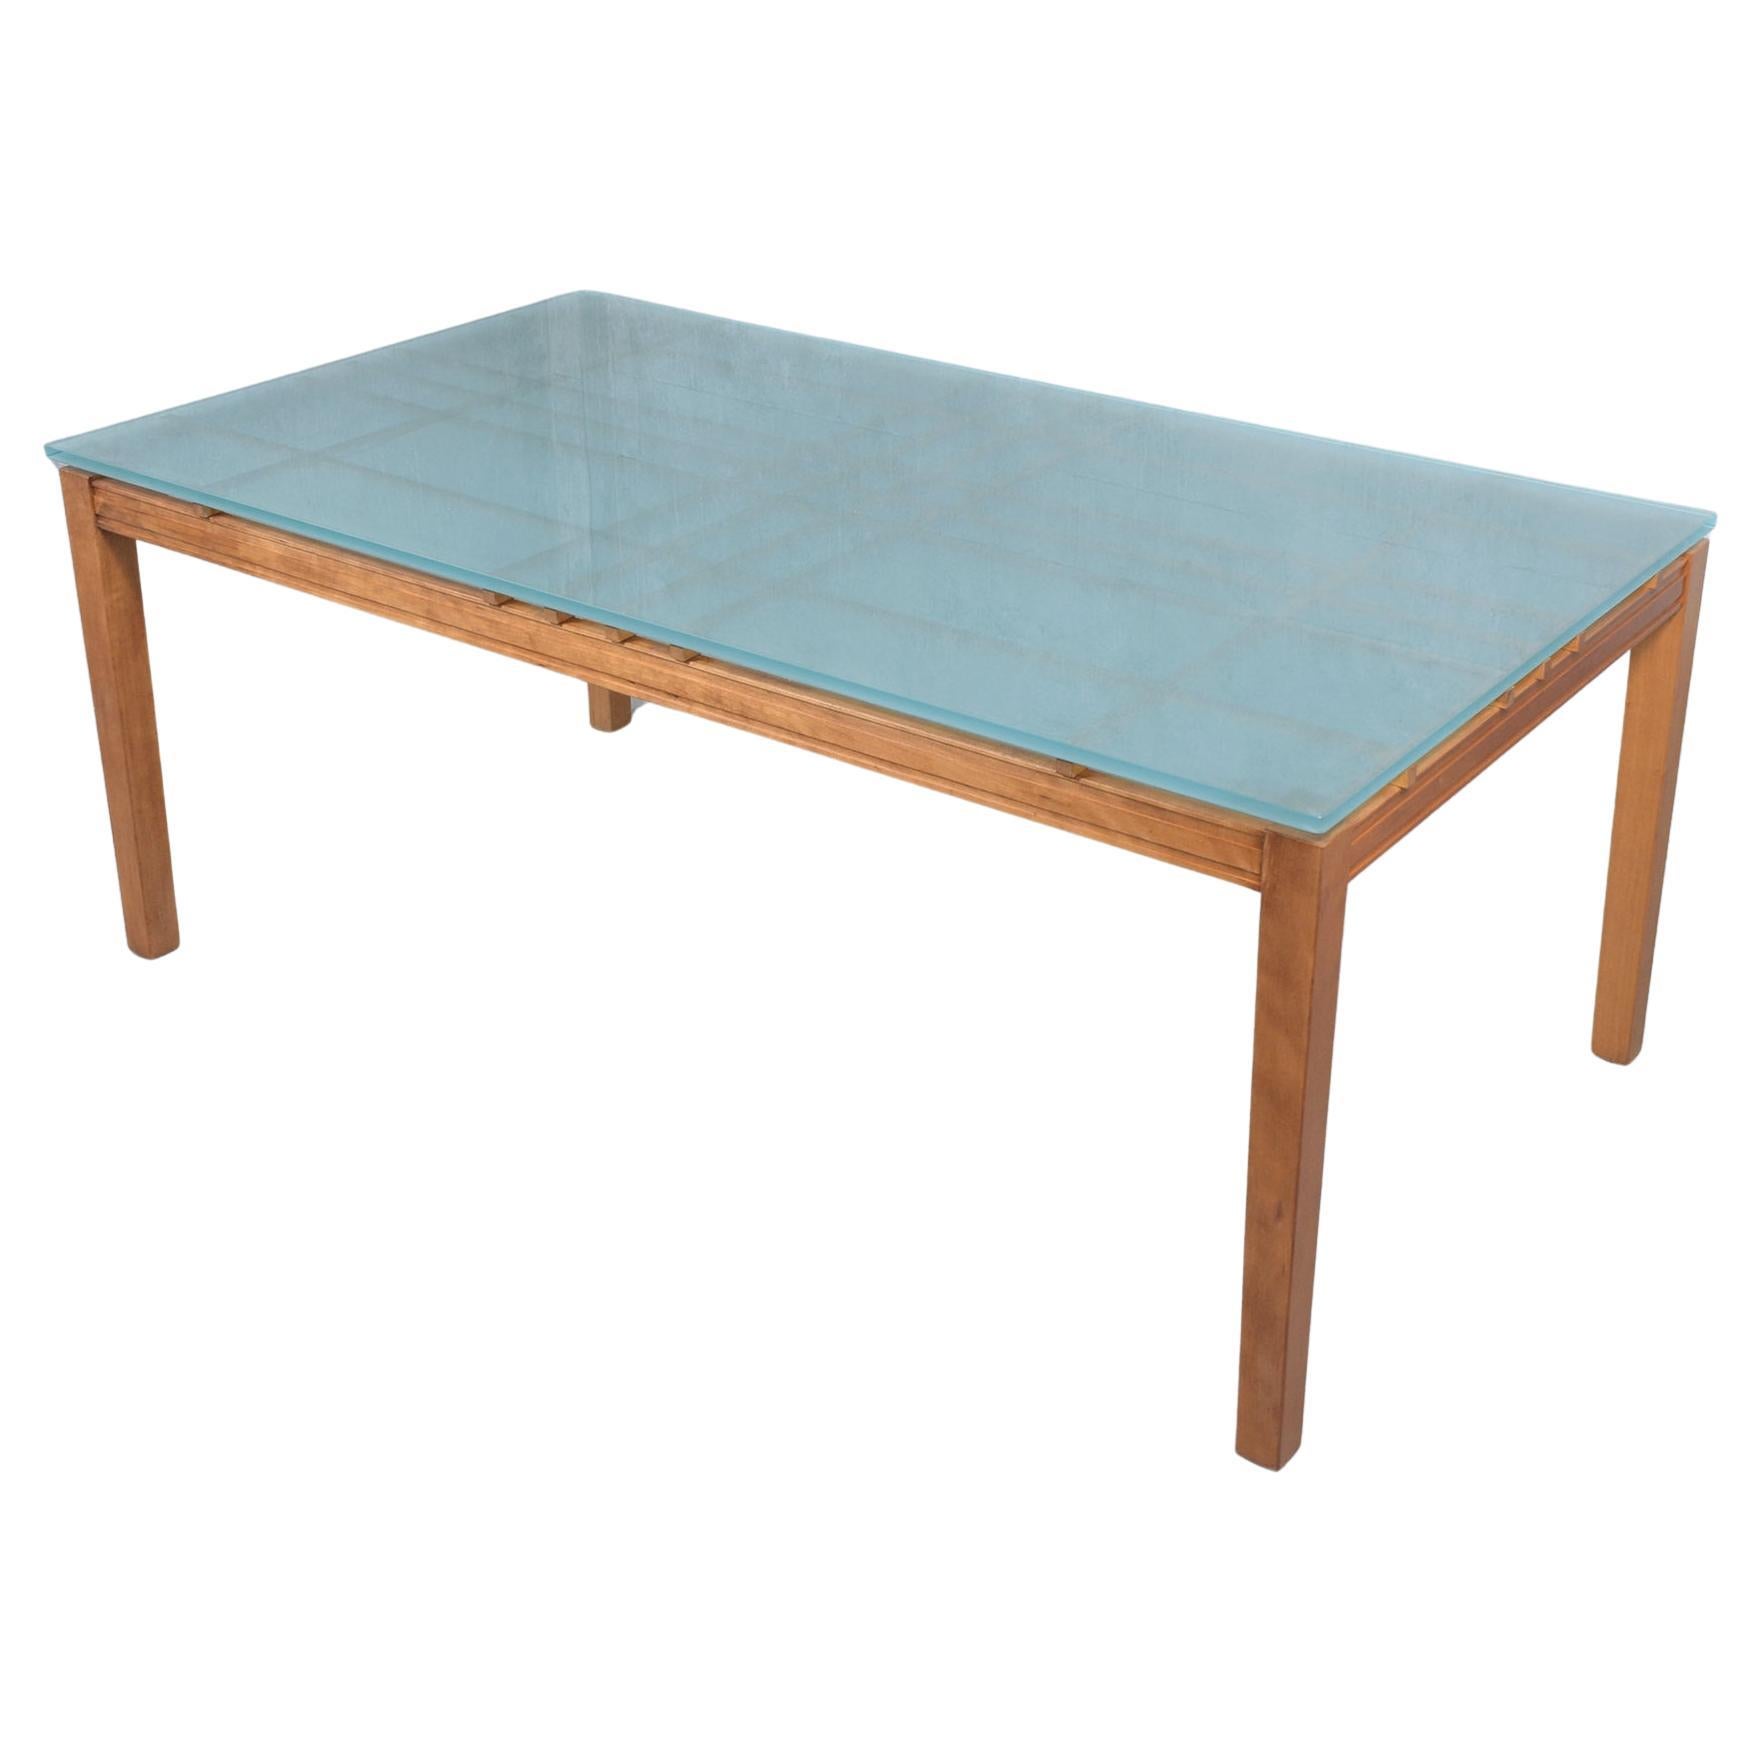 1980s Modern Maple Wood Dining Table with Frosted Glass Top For Sale